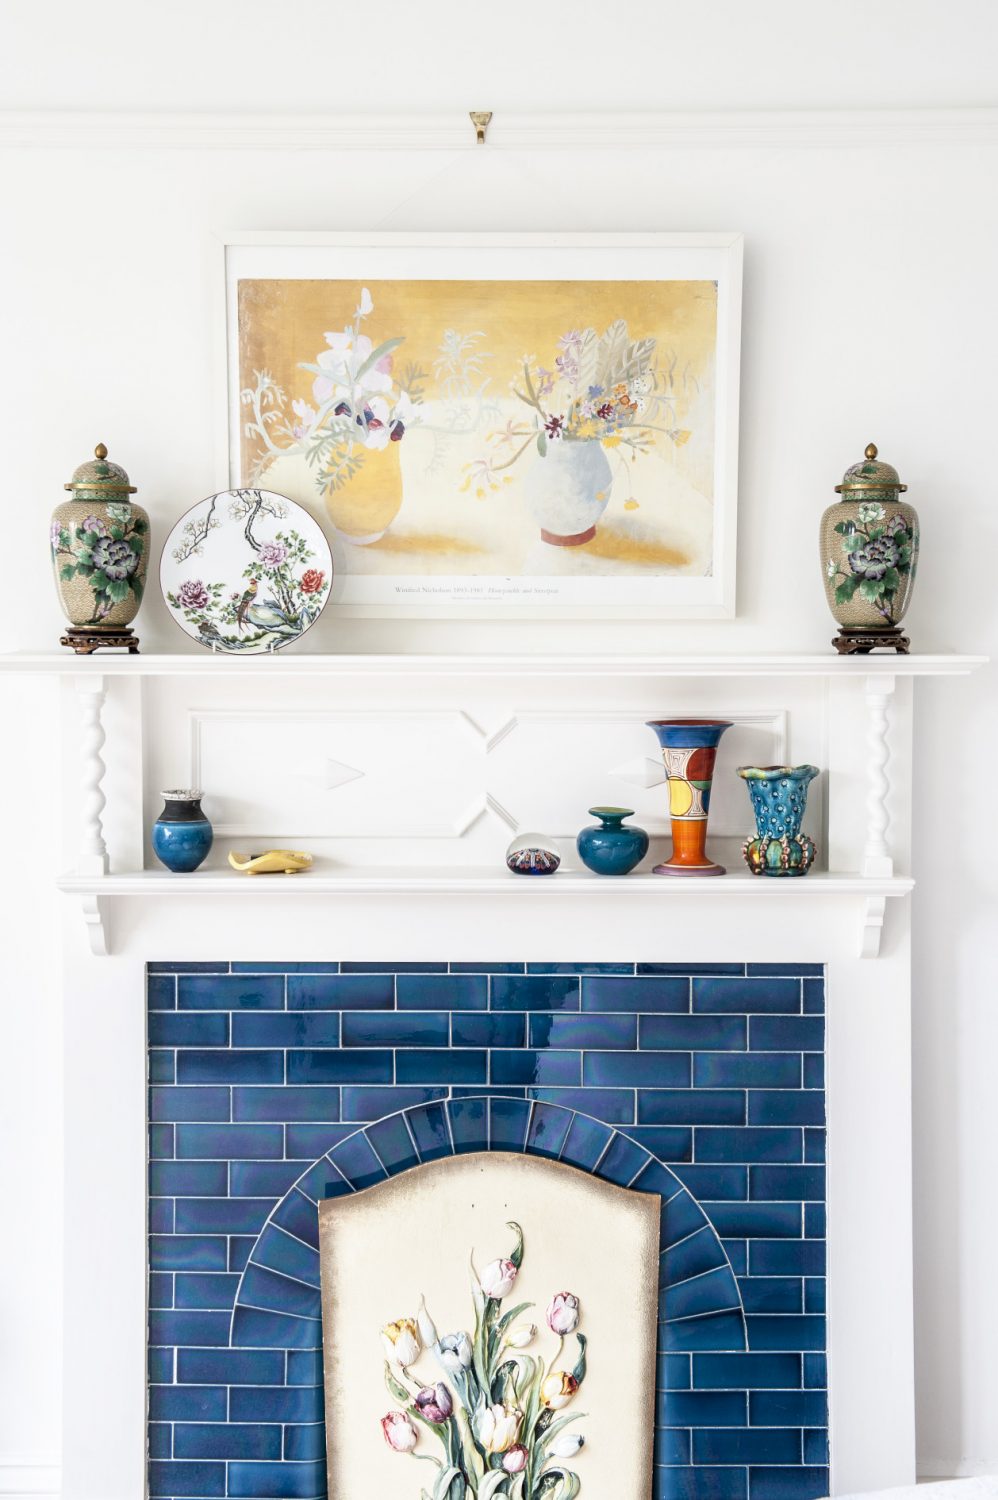 The tiled fireplace in the master bedroom